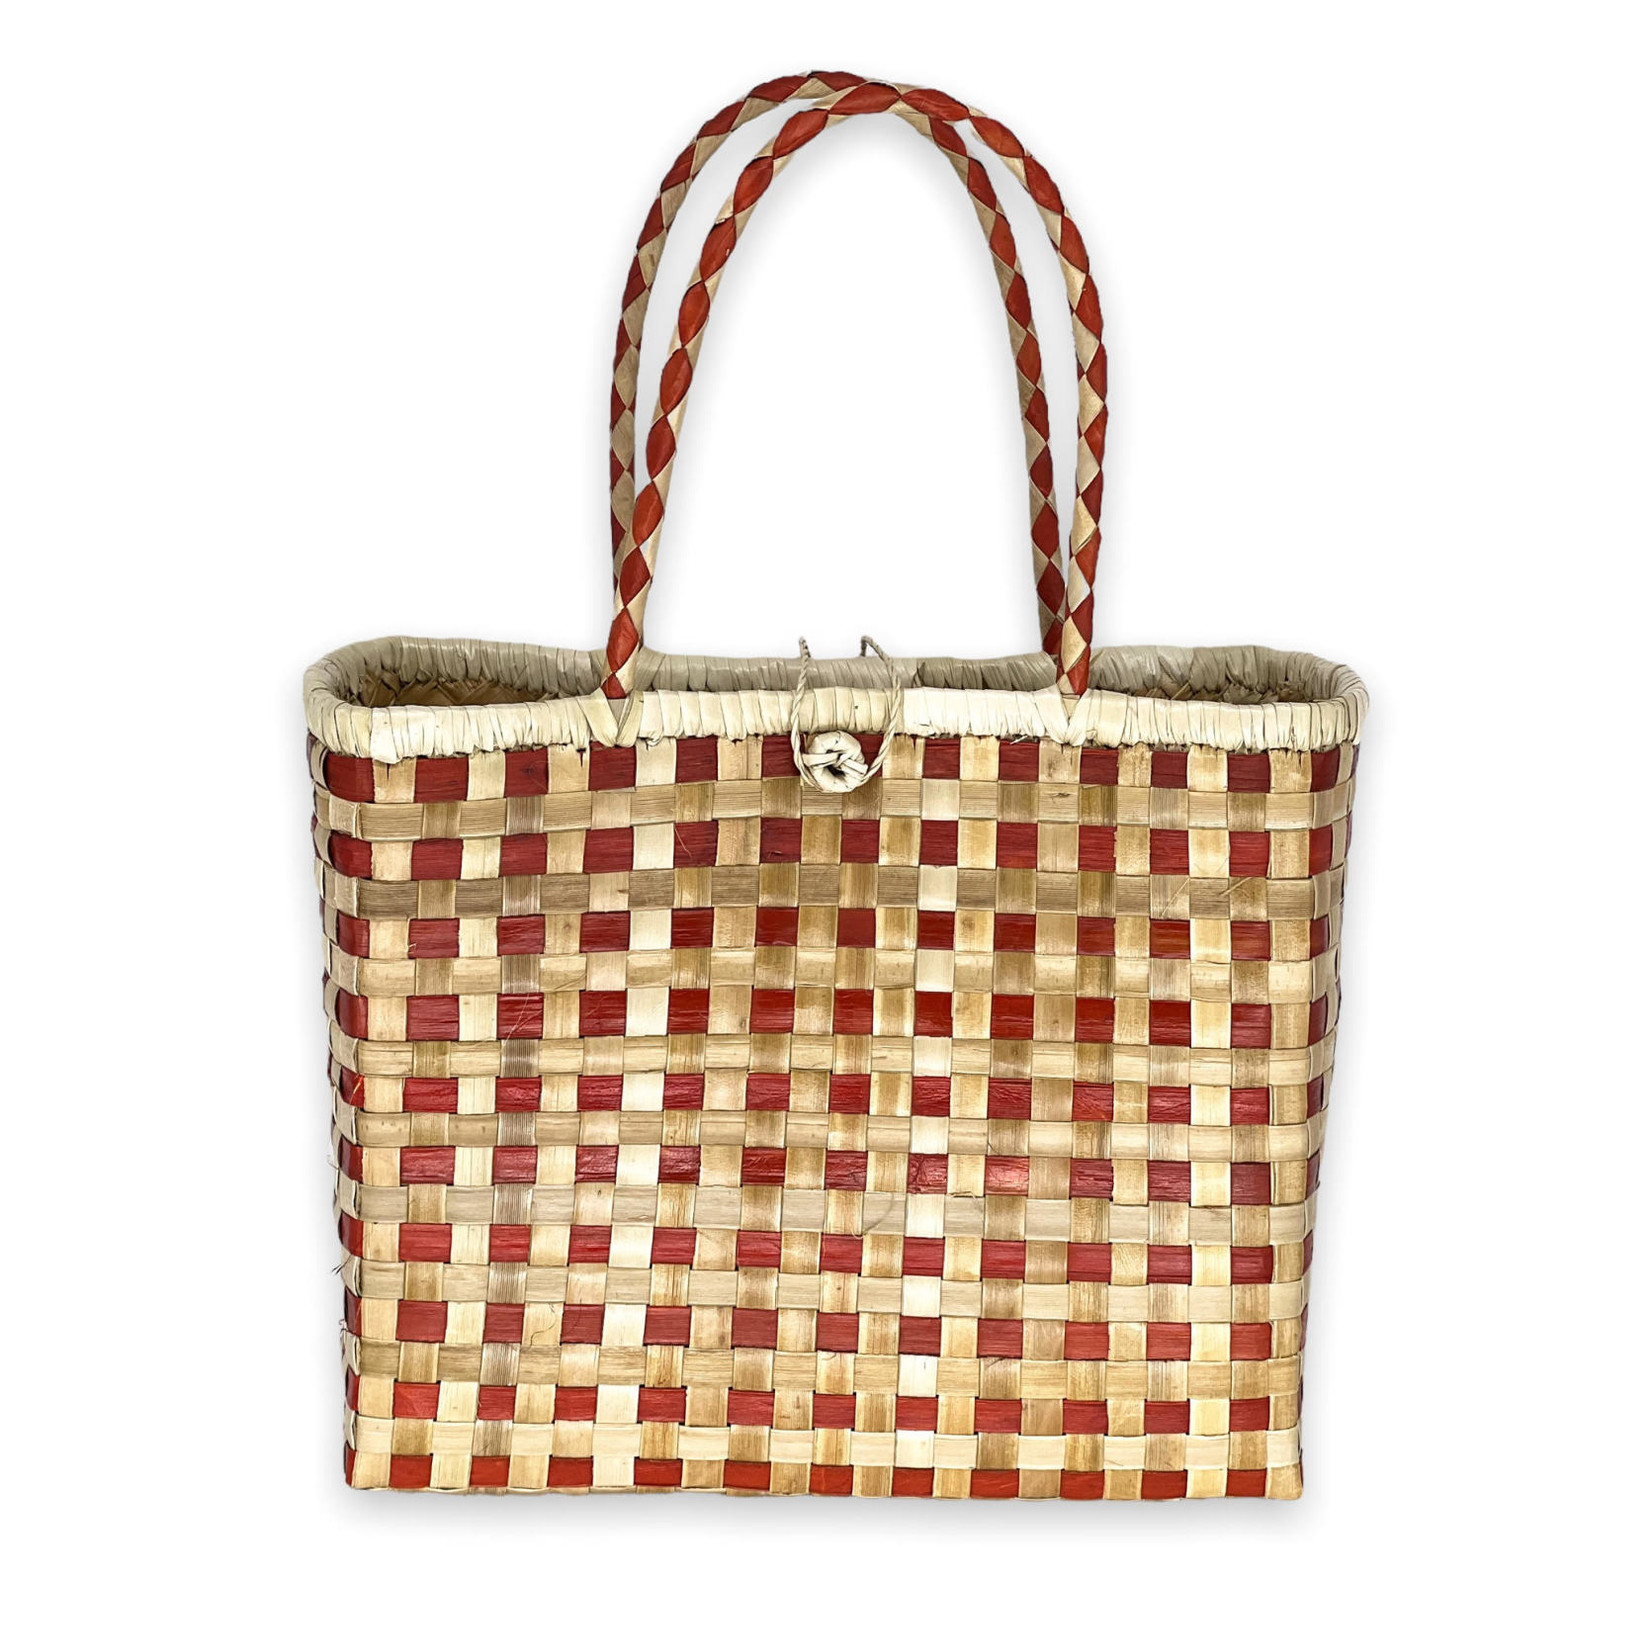 Two Tone Woven Lauhala Hula Bag Red Ginger *AVAILABLE IN 4 SIZES*